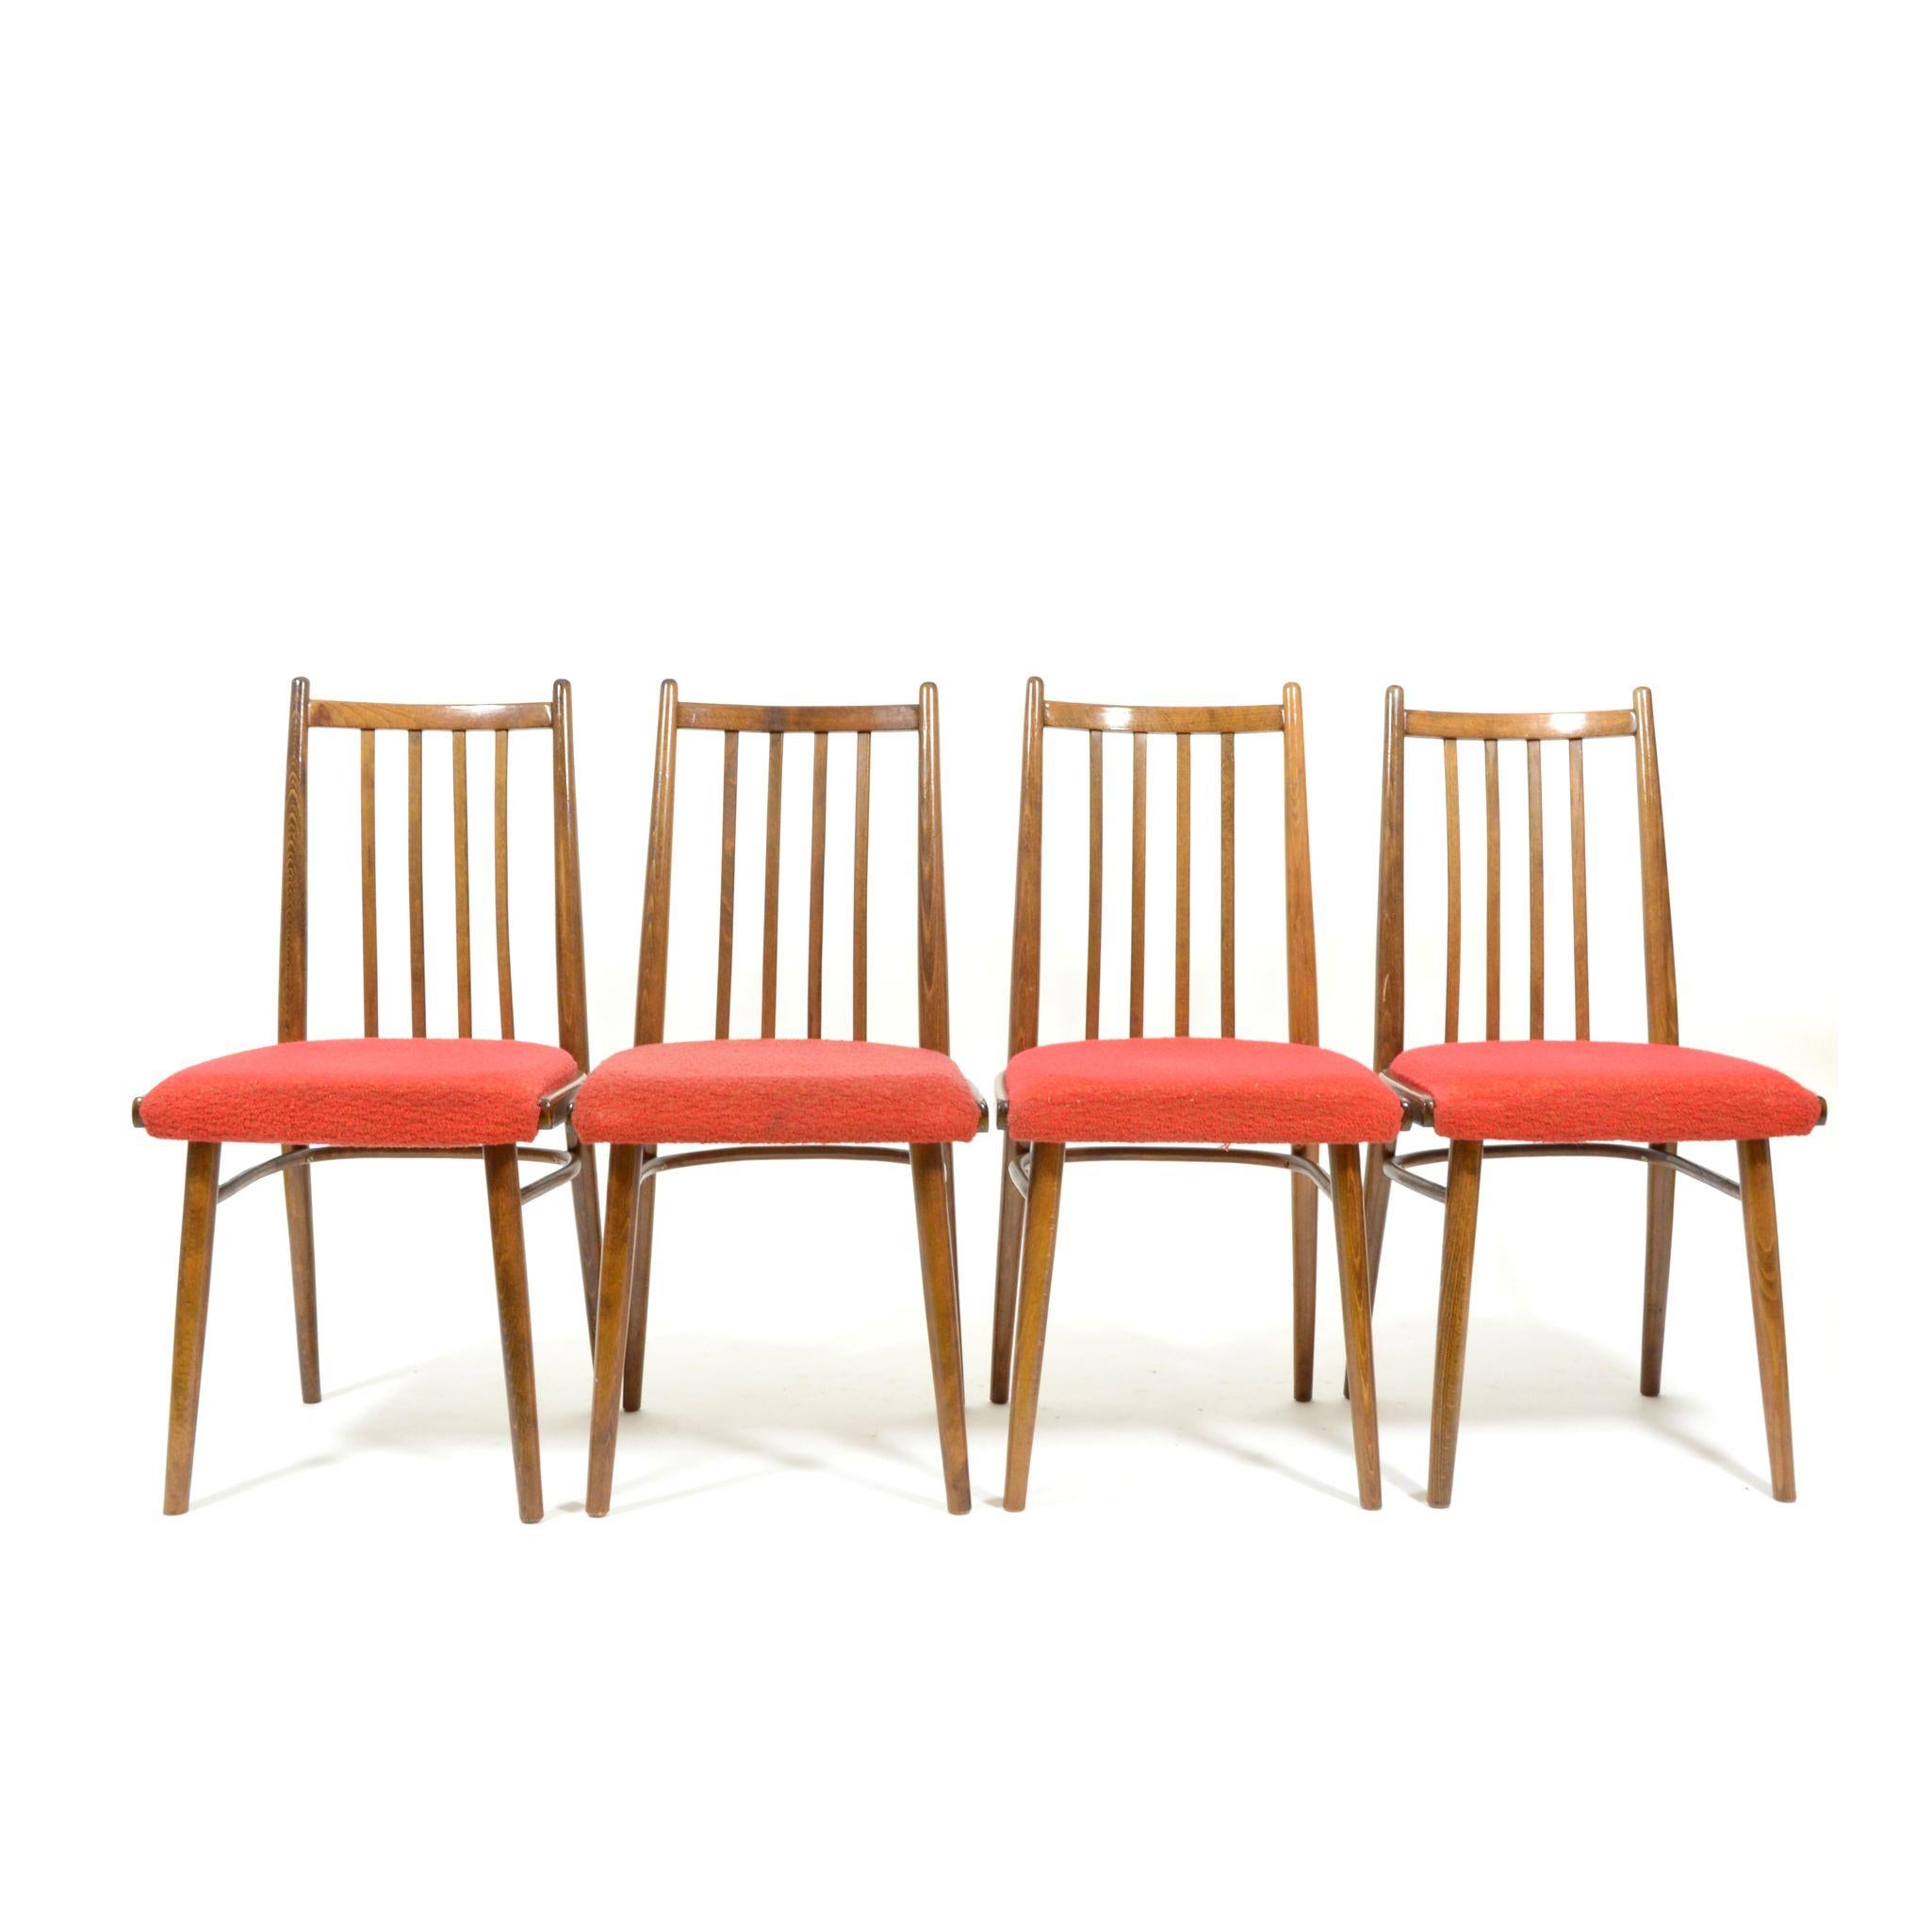 Set of Four Vintage Dining Chairs, Red Upholstered, Czechoslovakia, 1970s For Sale 4